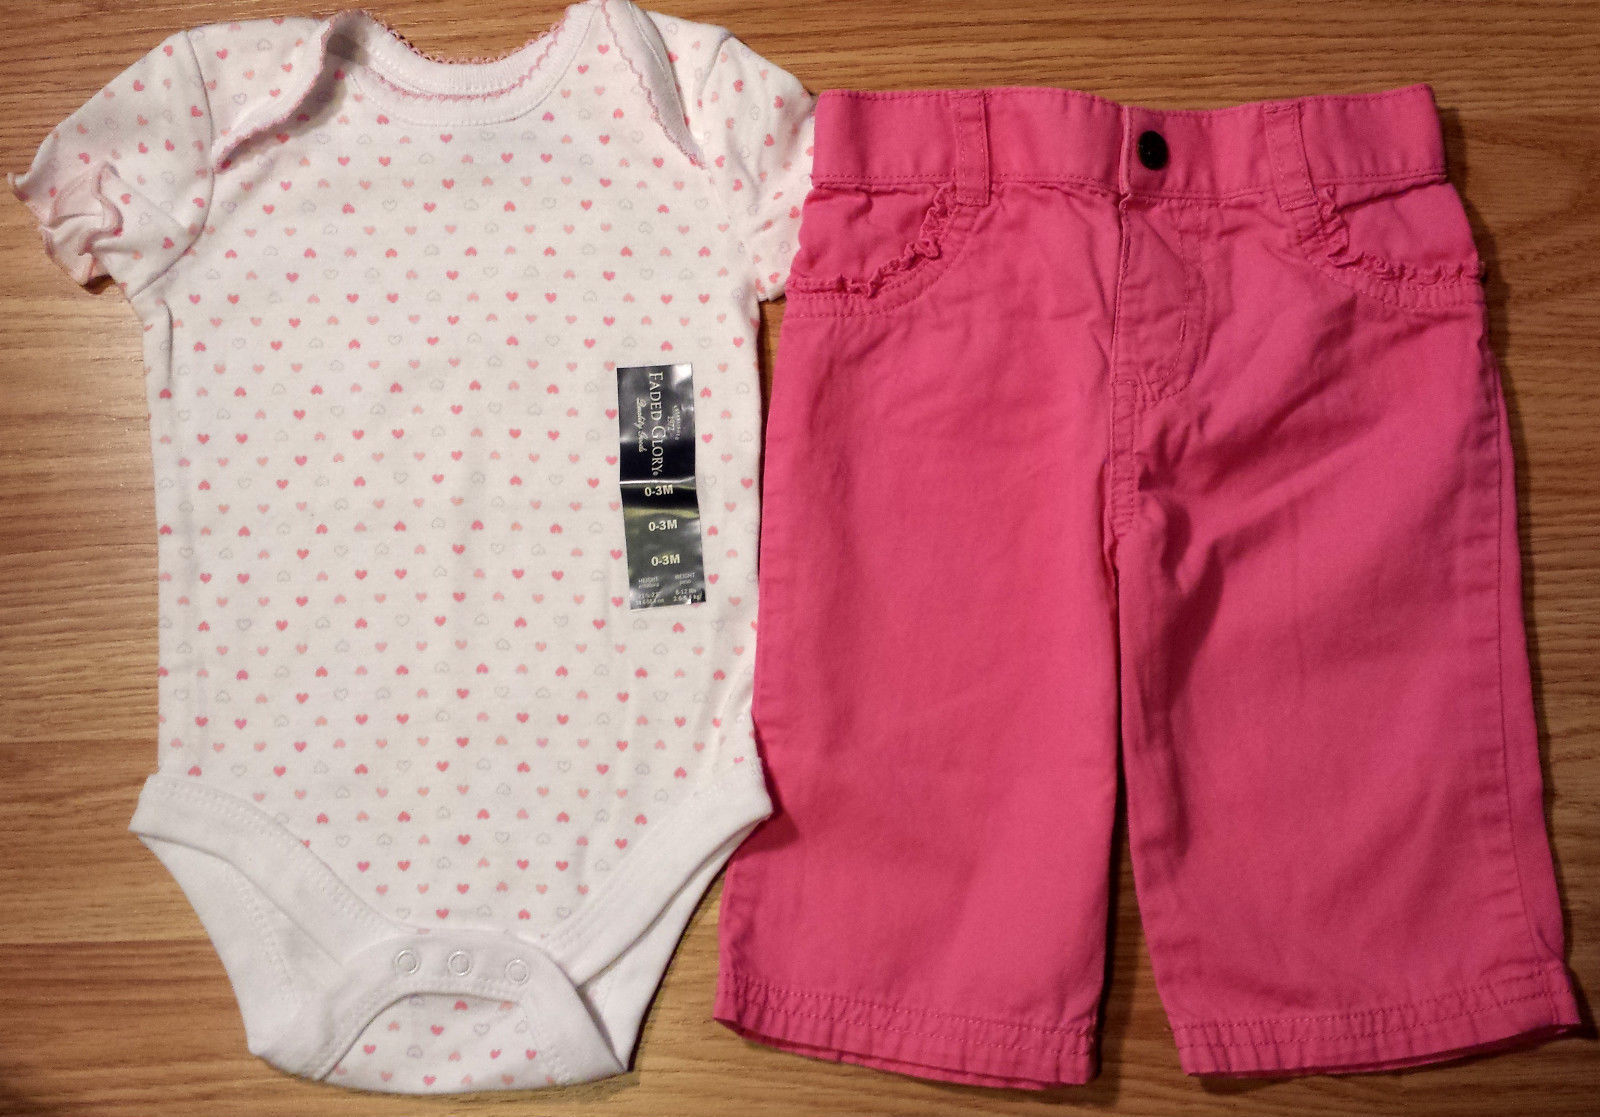 Girl's Sz 0-3 M Months 2 Pc Faded Glory NWT White Heart Top & Pink Ruffled Pants - $16.25